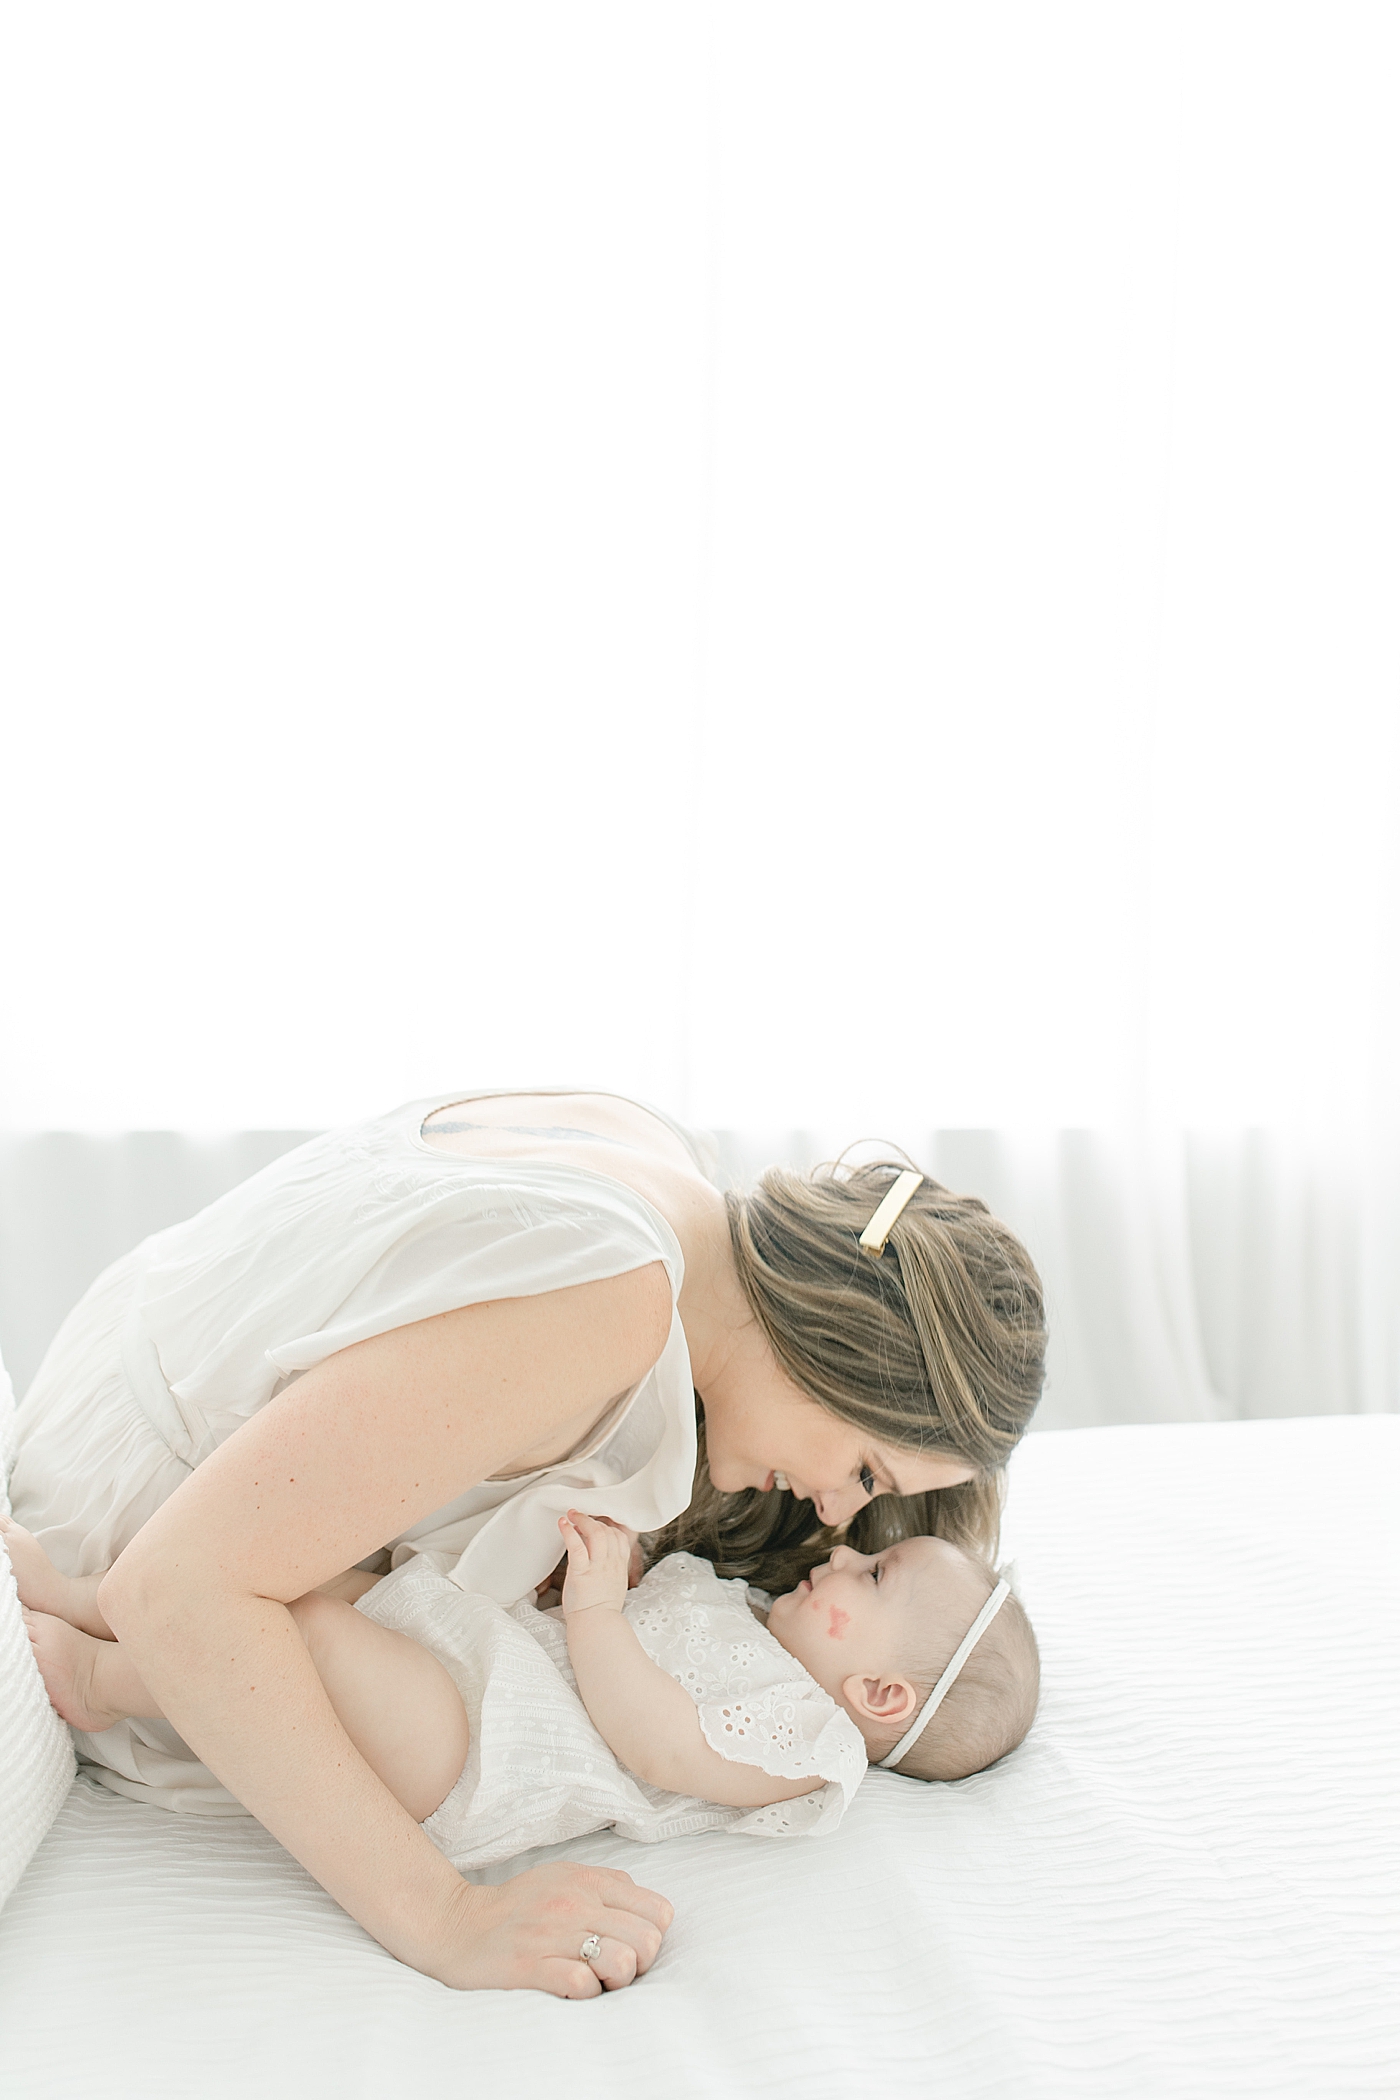 Mom and baby girl eskimo kisses | Photo by Pass Christian baby photographer Little Sunshine Photography